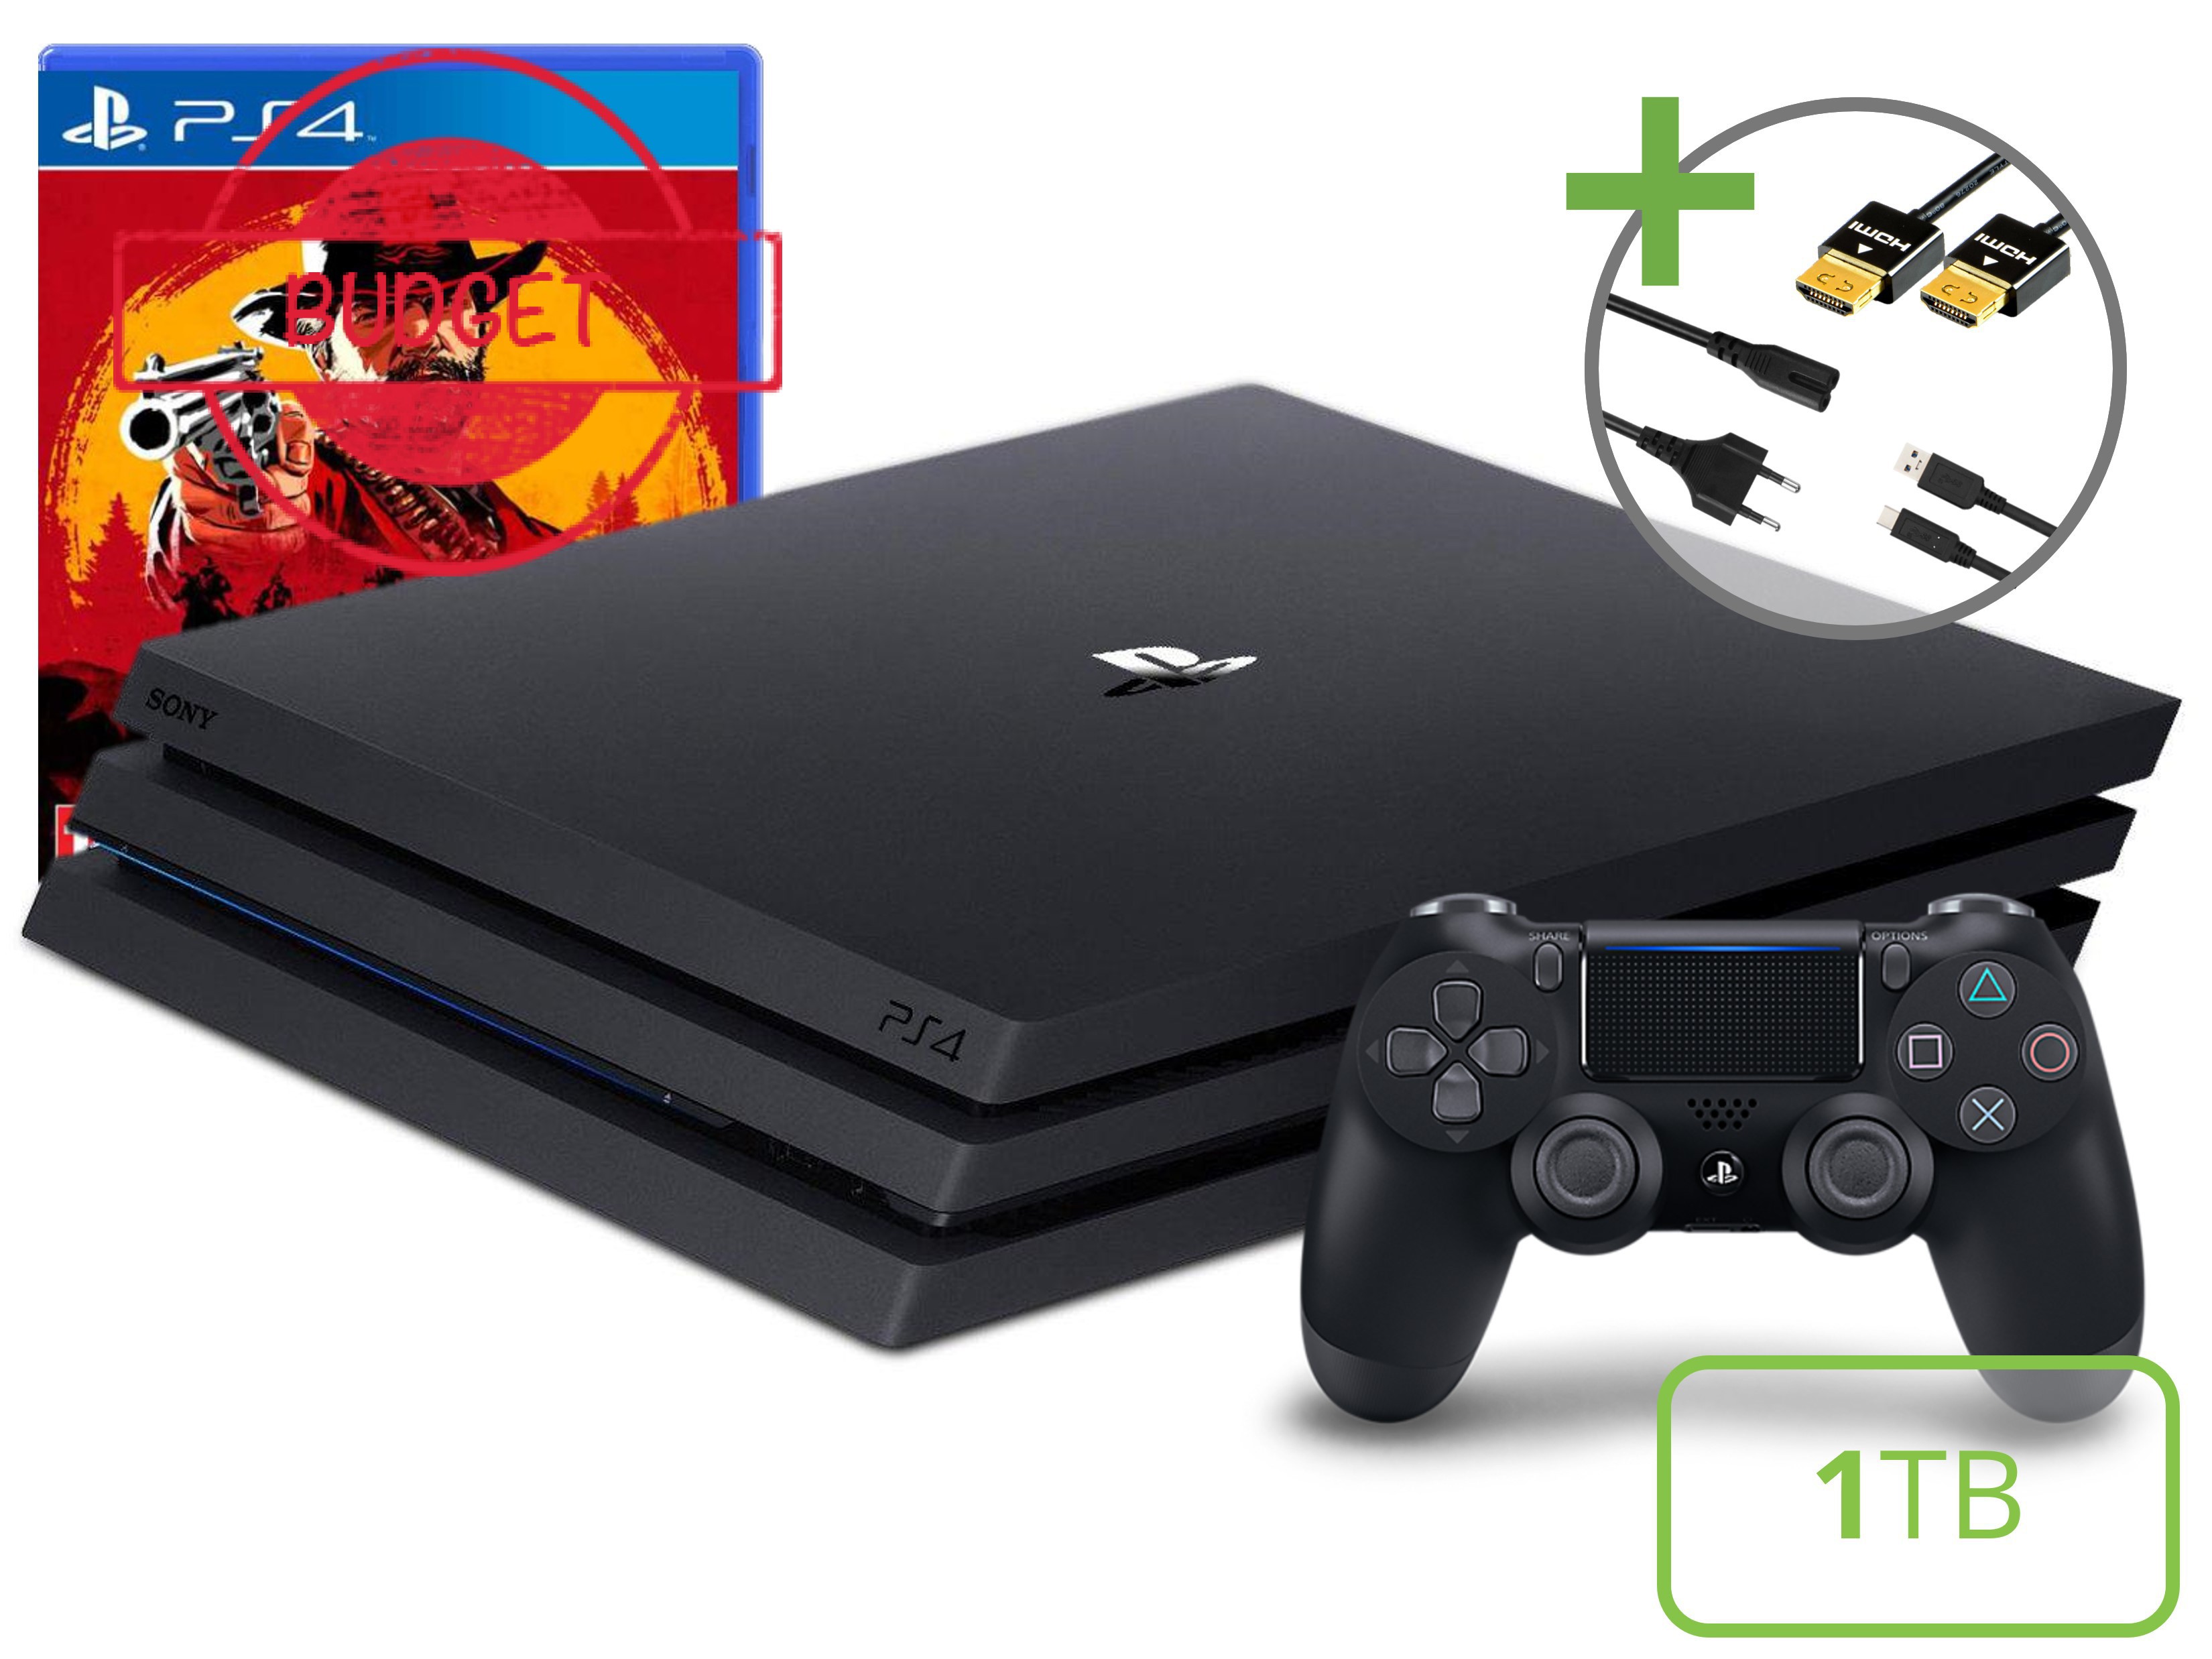 Sony PlayStation 4 Pro Starter Pack - 1TB Red Dead Redemption 2 Edition - Budget Kopen | Playstation 4 Hardware